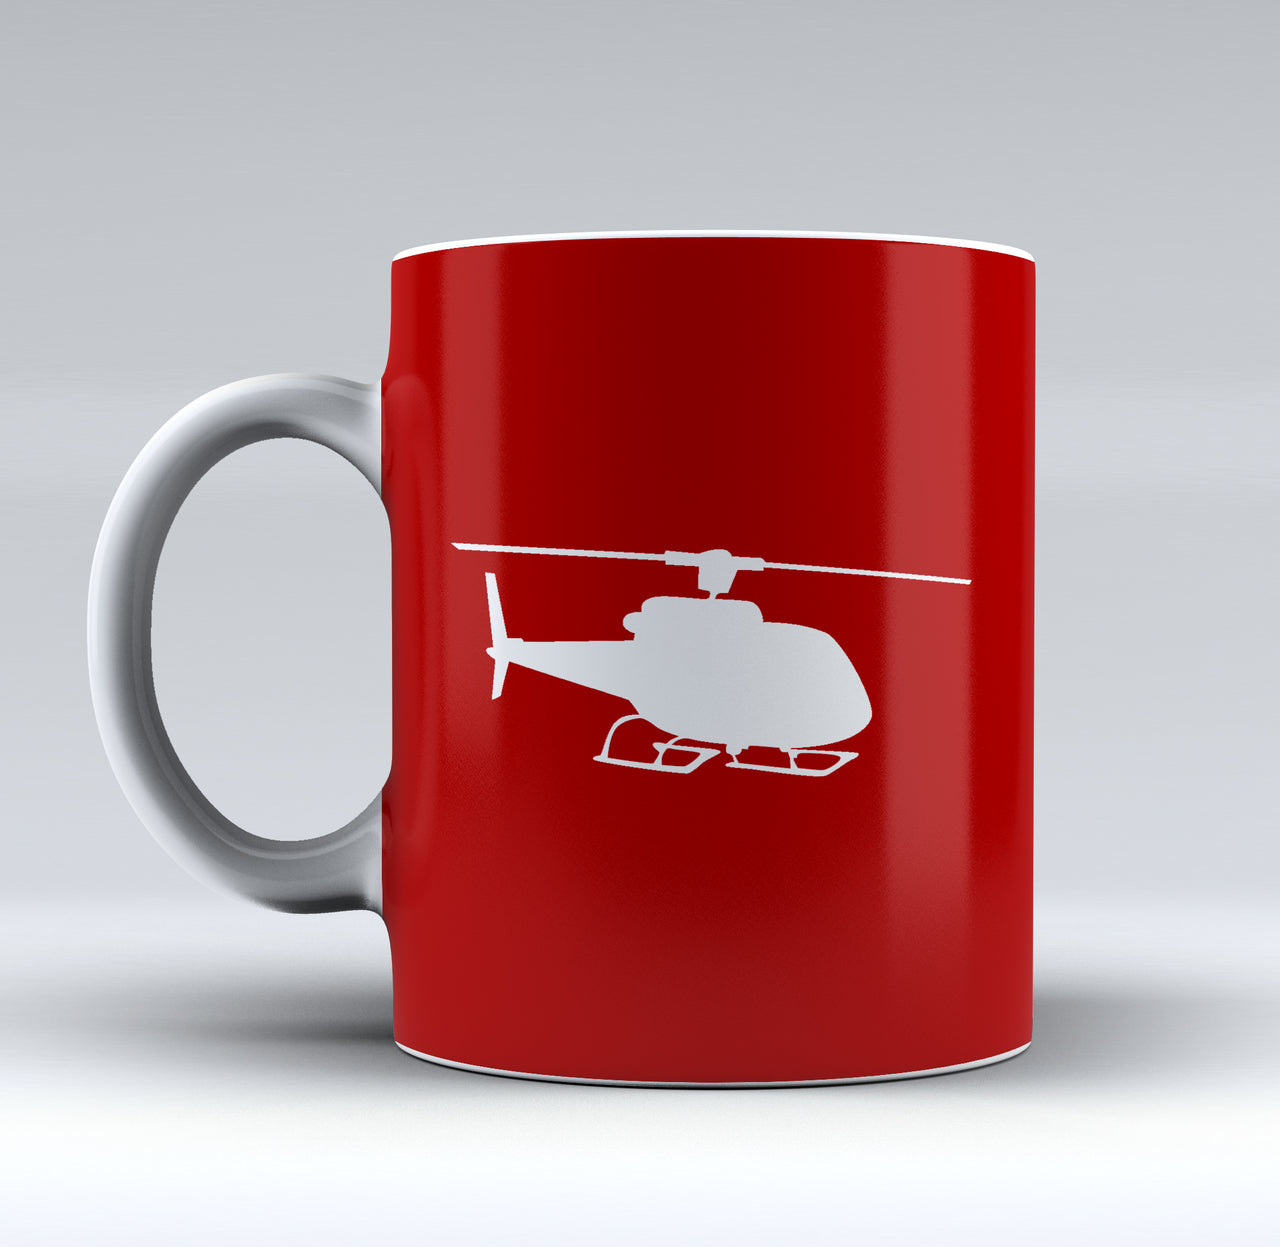 Helicopter Silhouette Designed Mugs